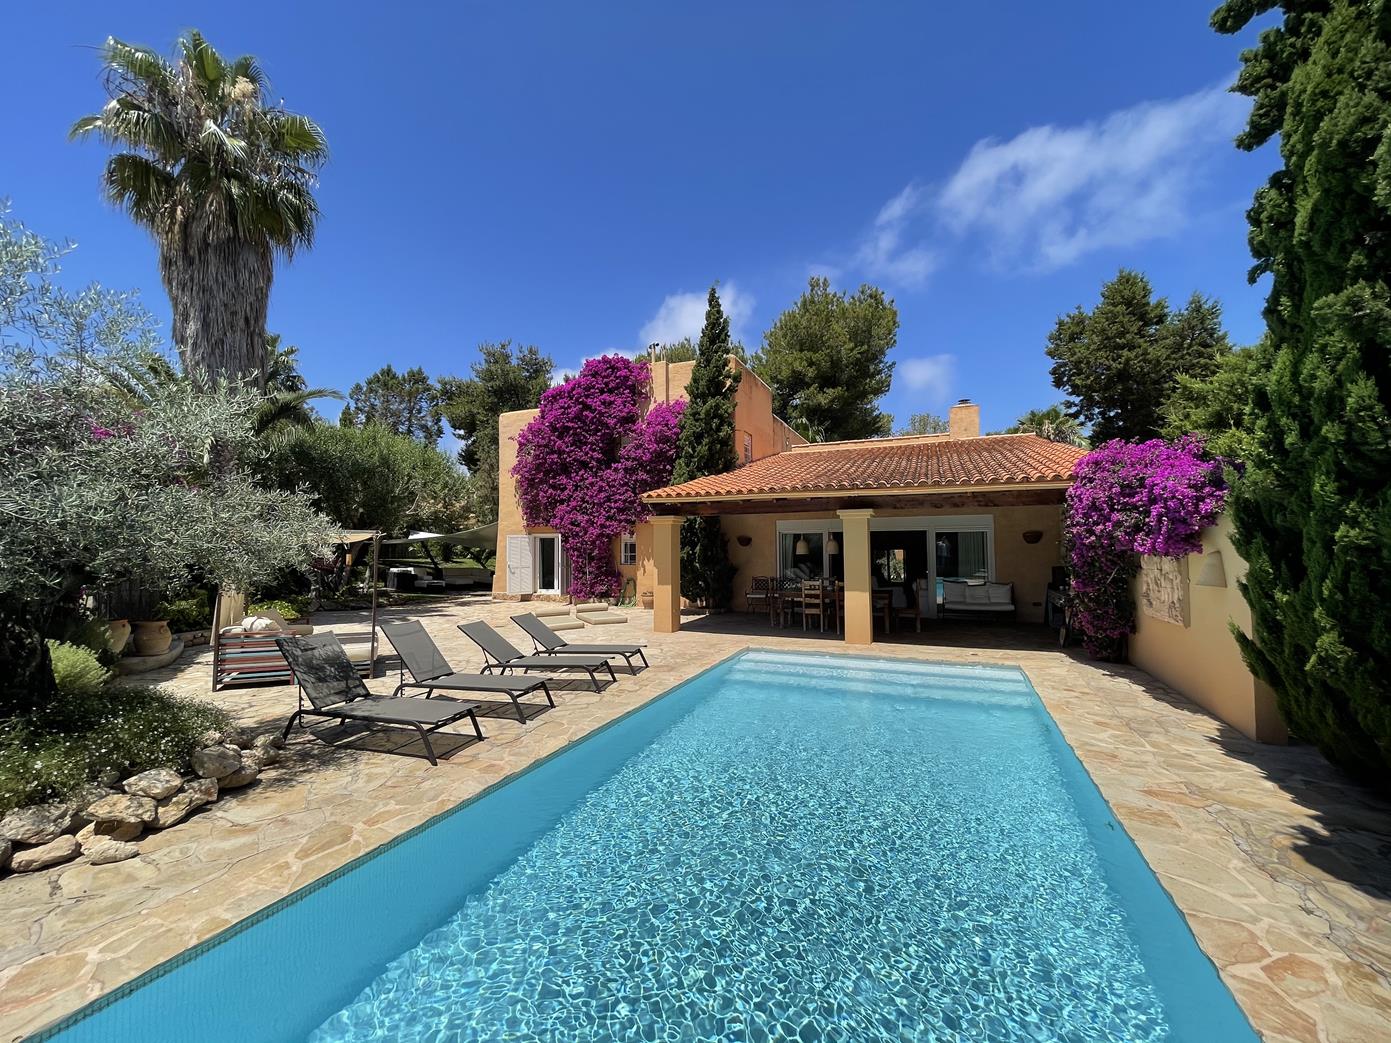 Spacious and beautiful Villa with lots of garden